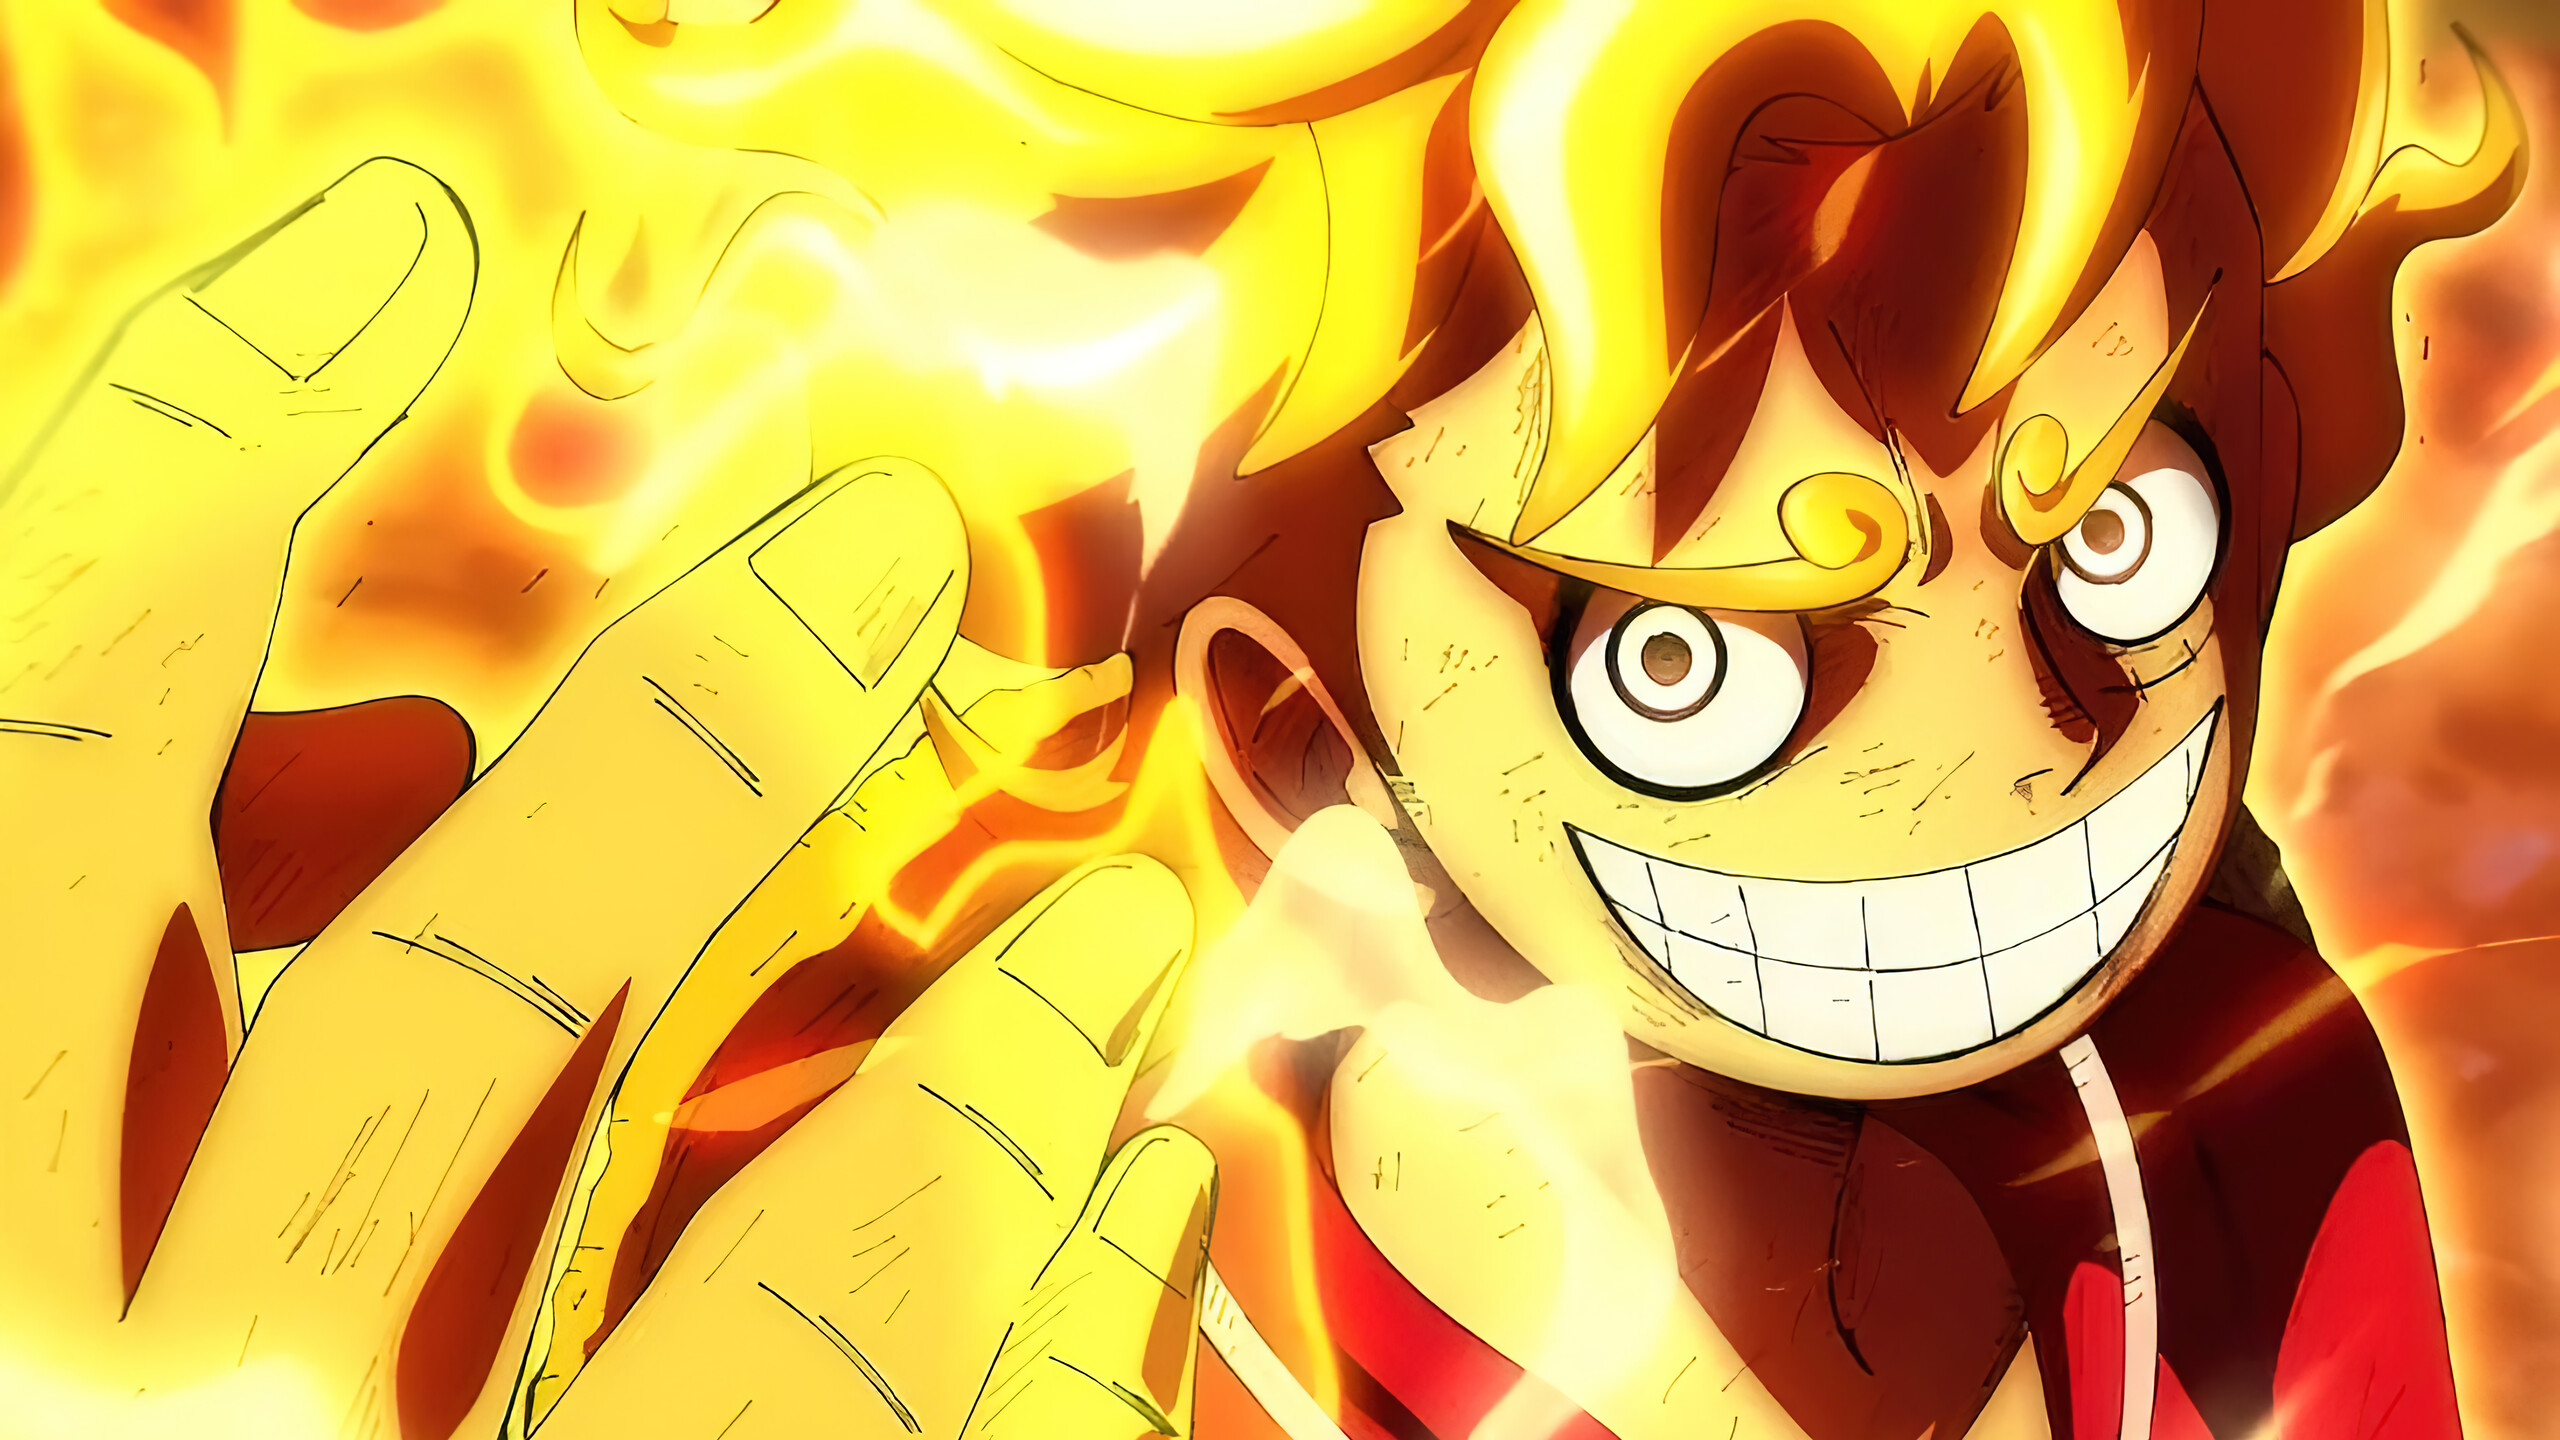 HD wallpaper Monkey D Luffy anime One Piece horror spooky judgment  Day  Apocalypse  Wallpaper Flare